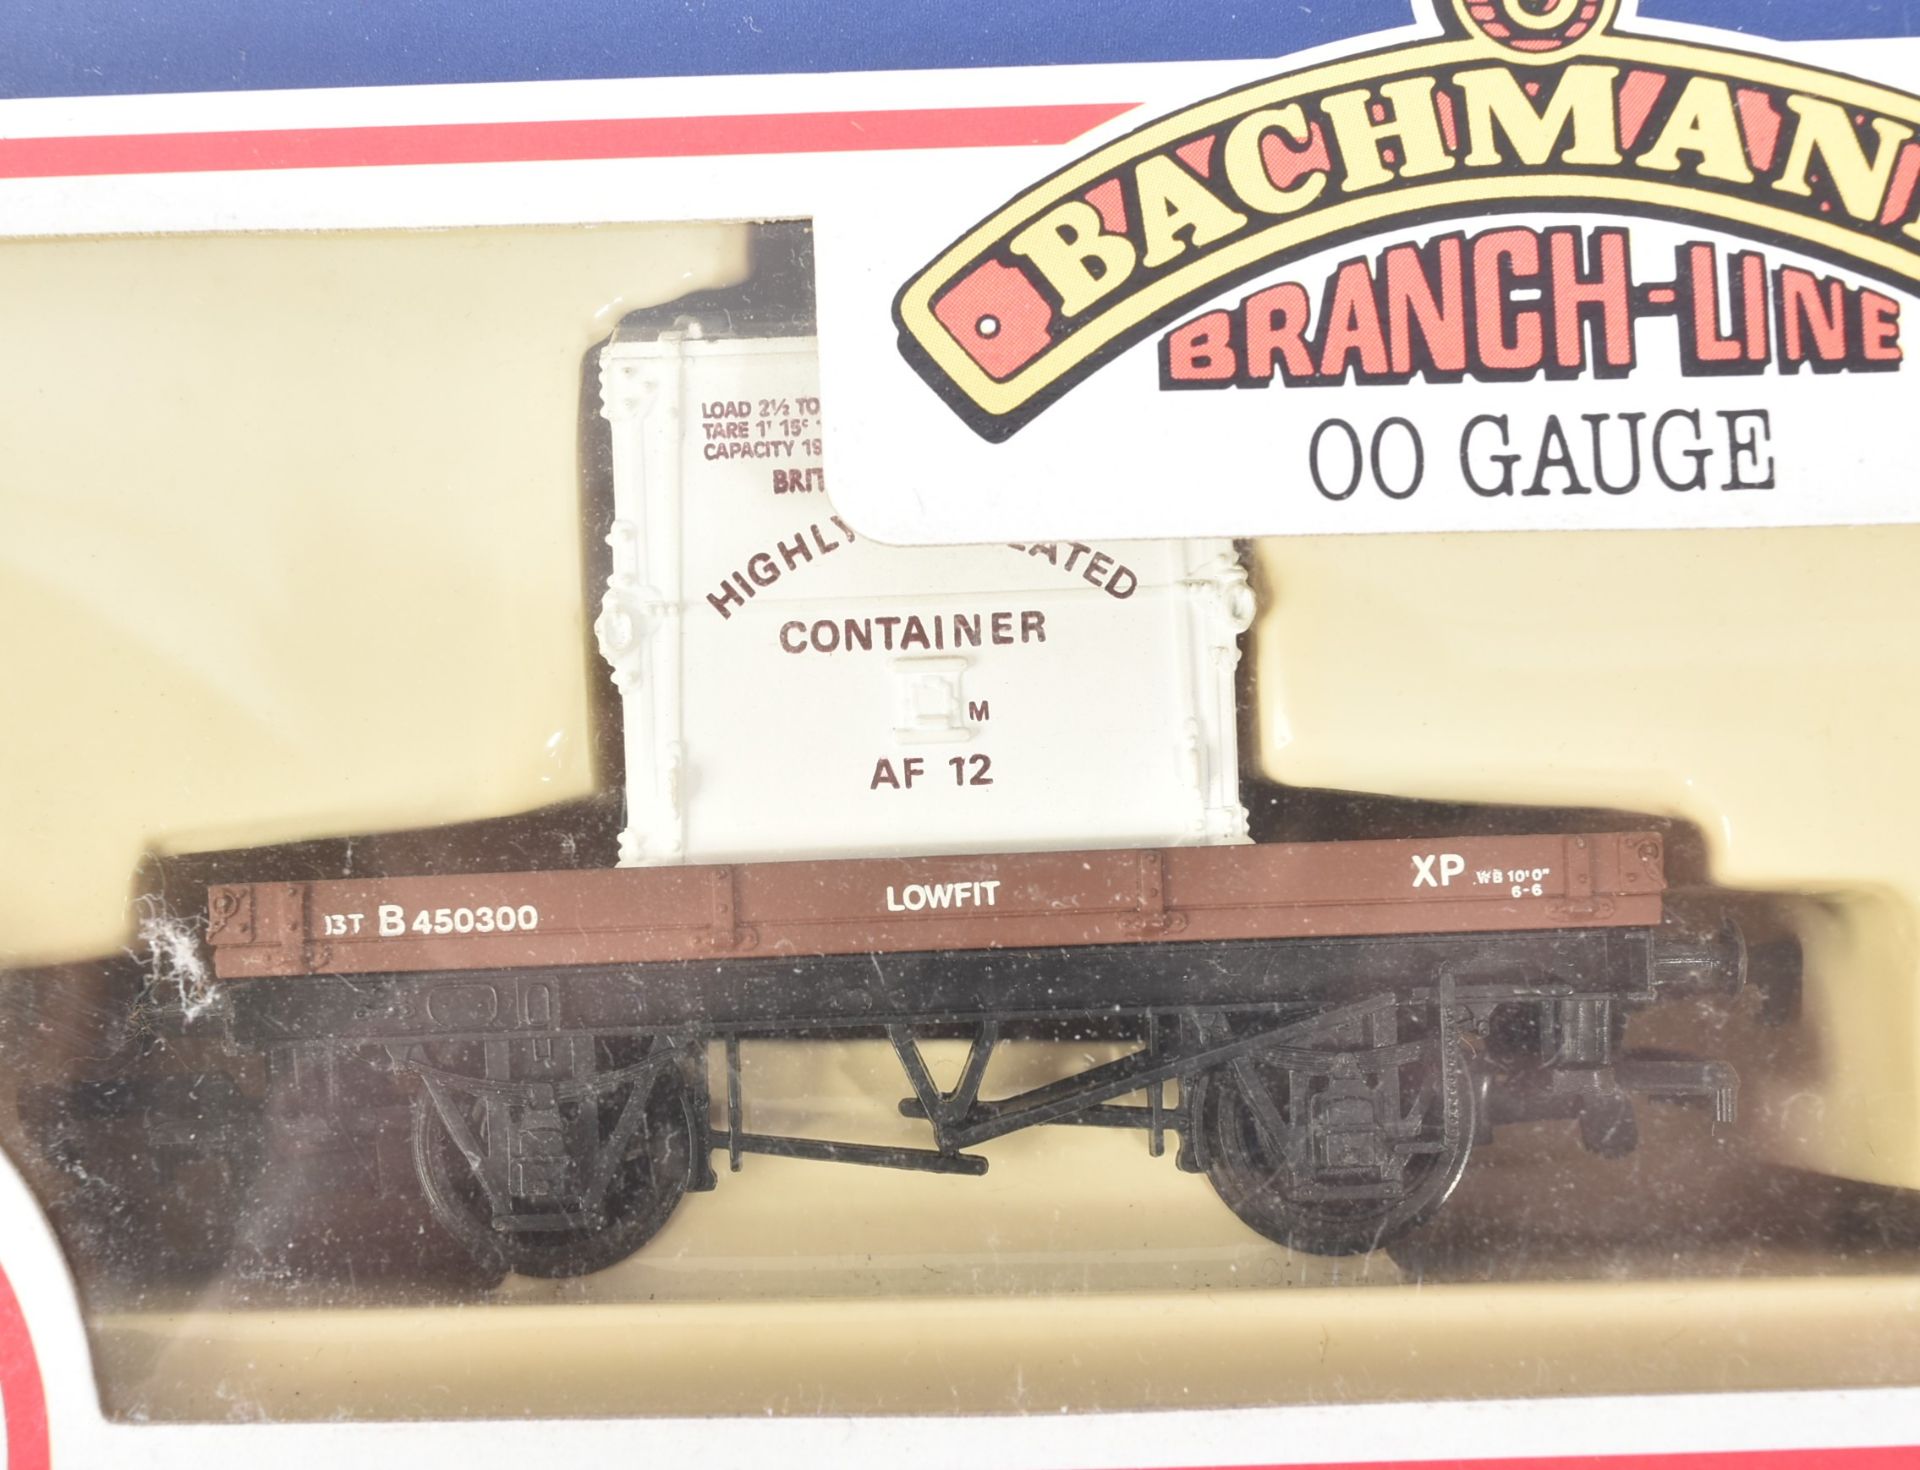 COLLECTION OF BACHMANN BRANCH-LINE OO GAUGE MODEL RAILWAY ROLLING STOCK - Image 5 of 6